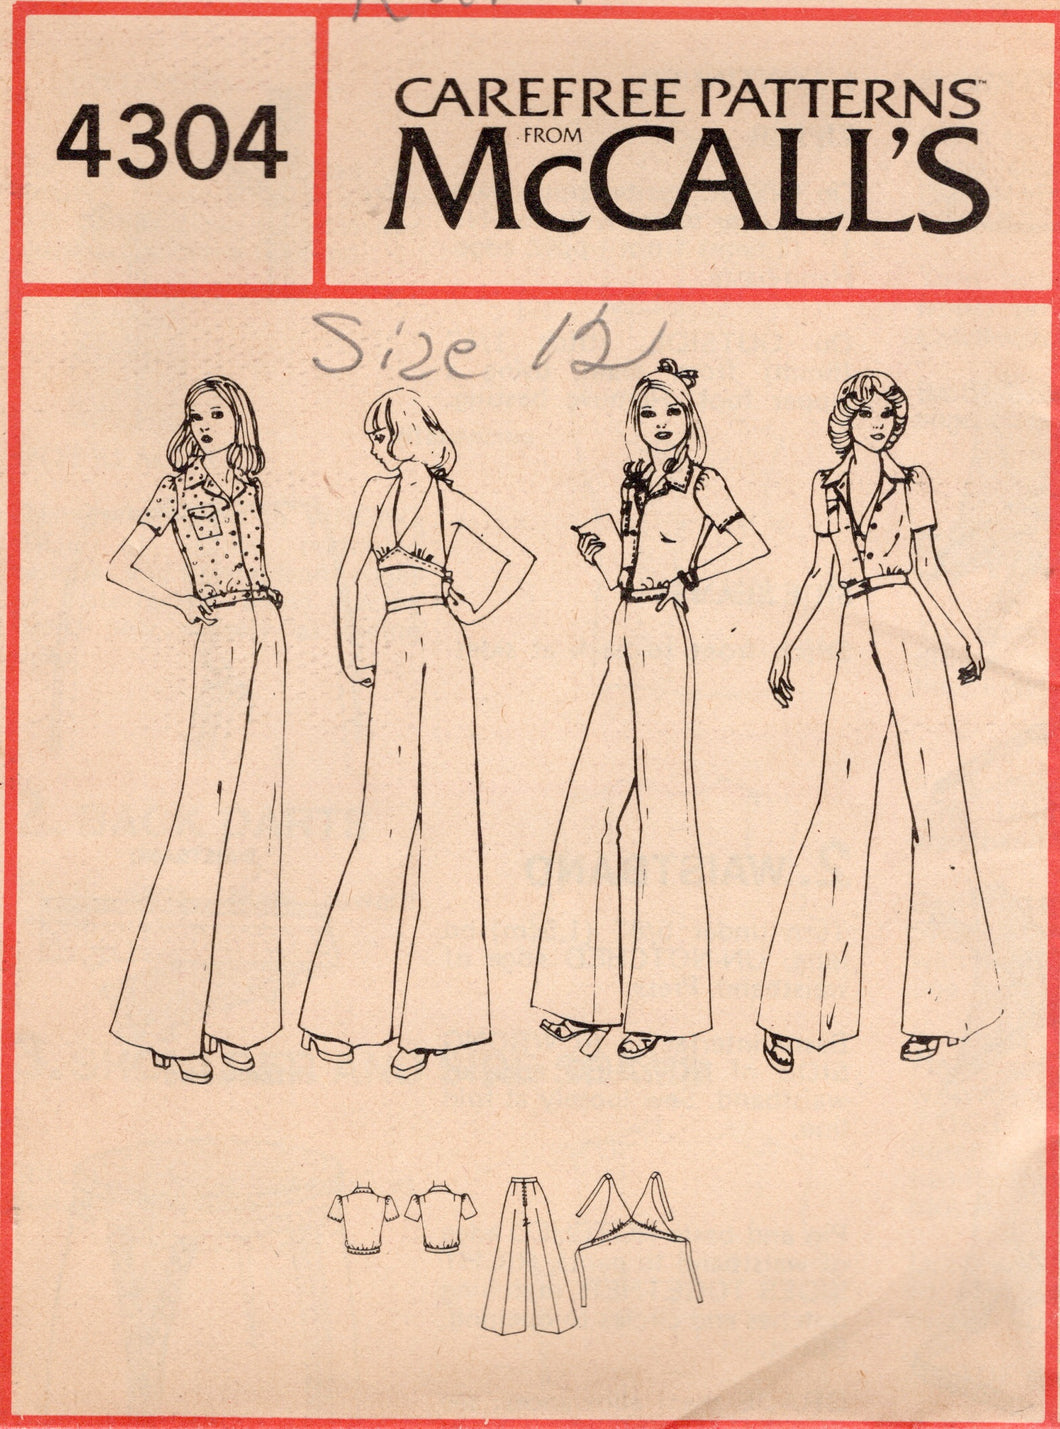 1970's McCall's Halter Tie Top, Button Up Shirt, and Bell Bottom Pants Pattern - Bust 33-34